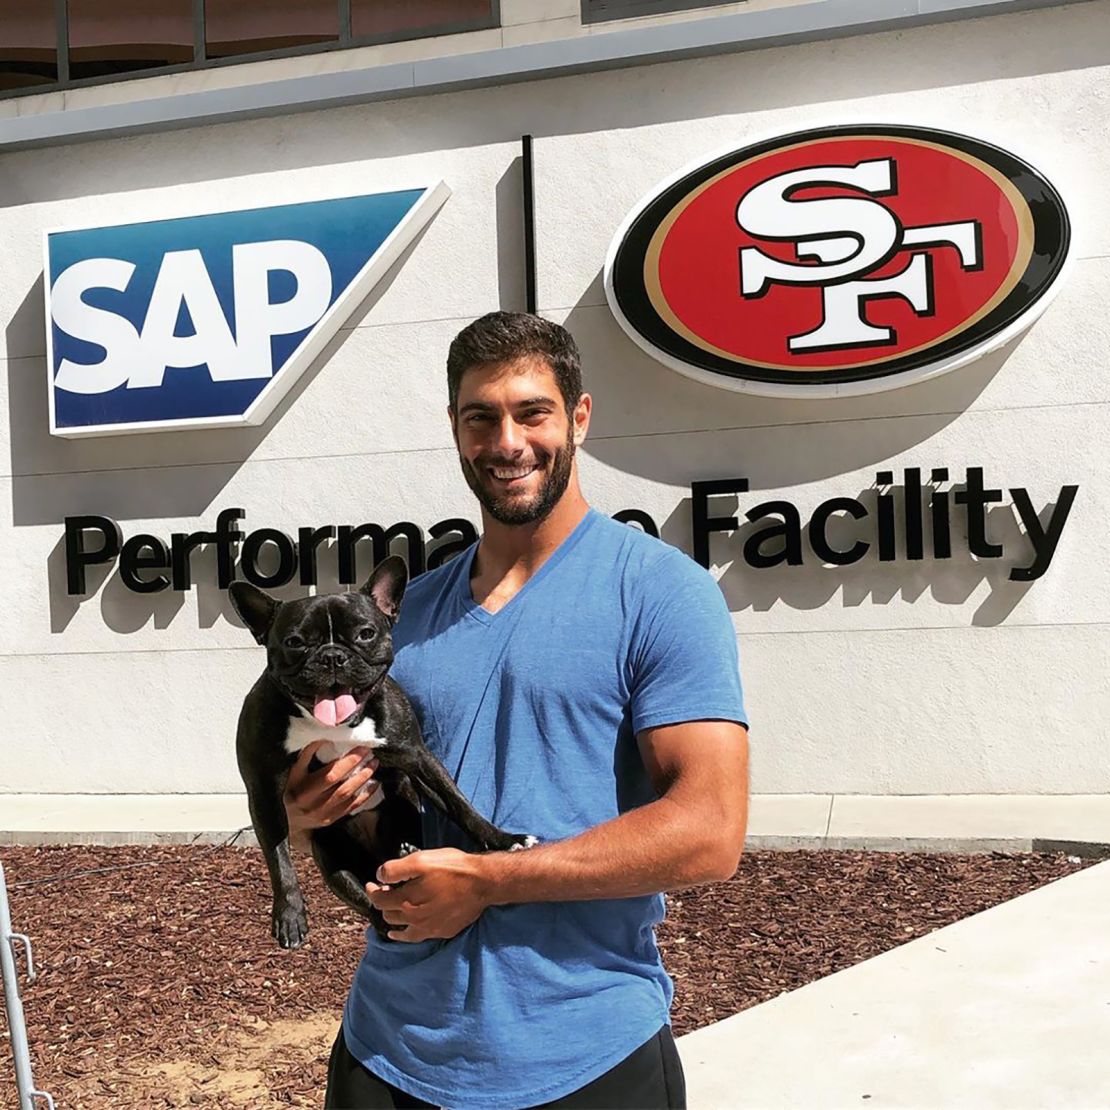 Quarterback Jimmy Garoppolo hangs with Zoë at the Niner's training facility.